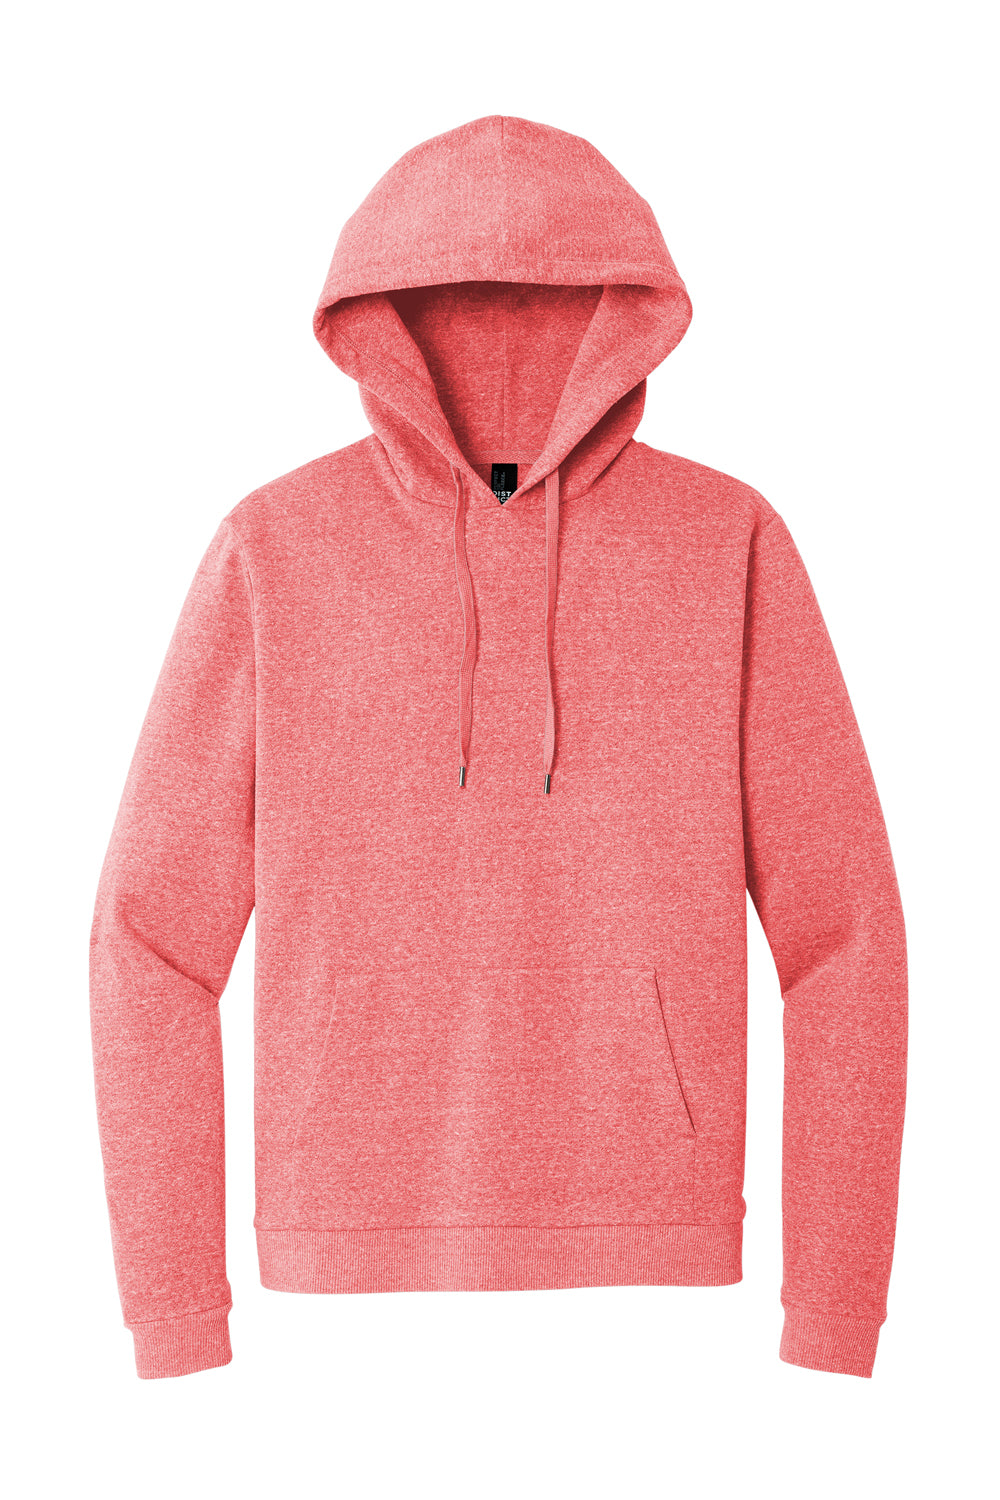 District DT1300 Mens Perfect Tri Fleece Hooded Sweatshirt Hoodie Red Frost Flat Front